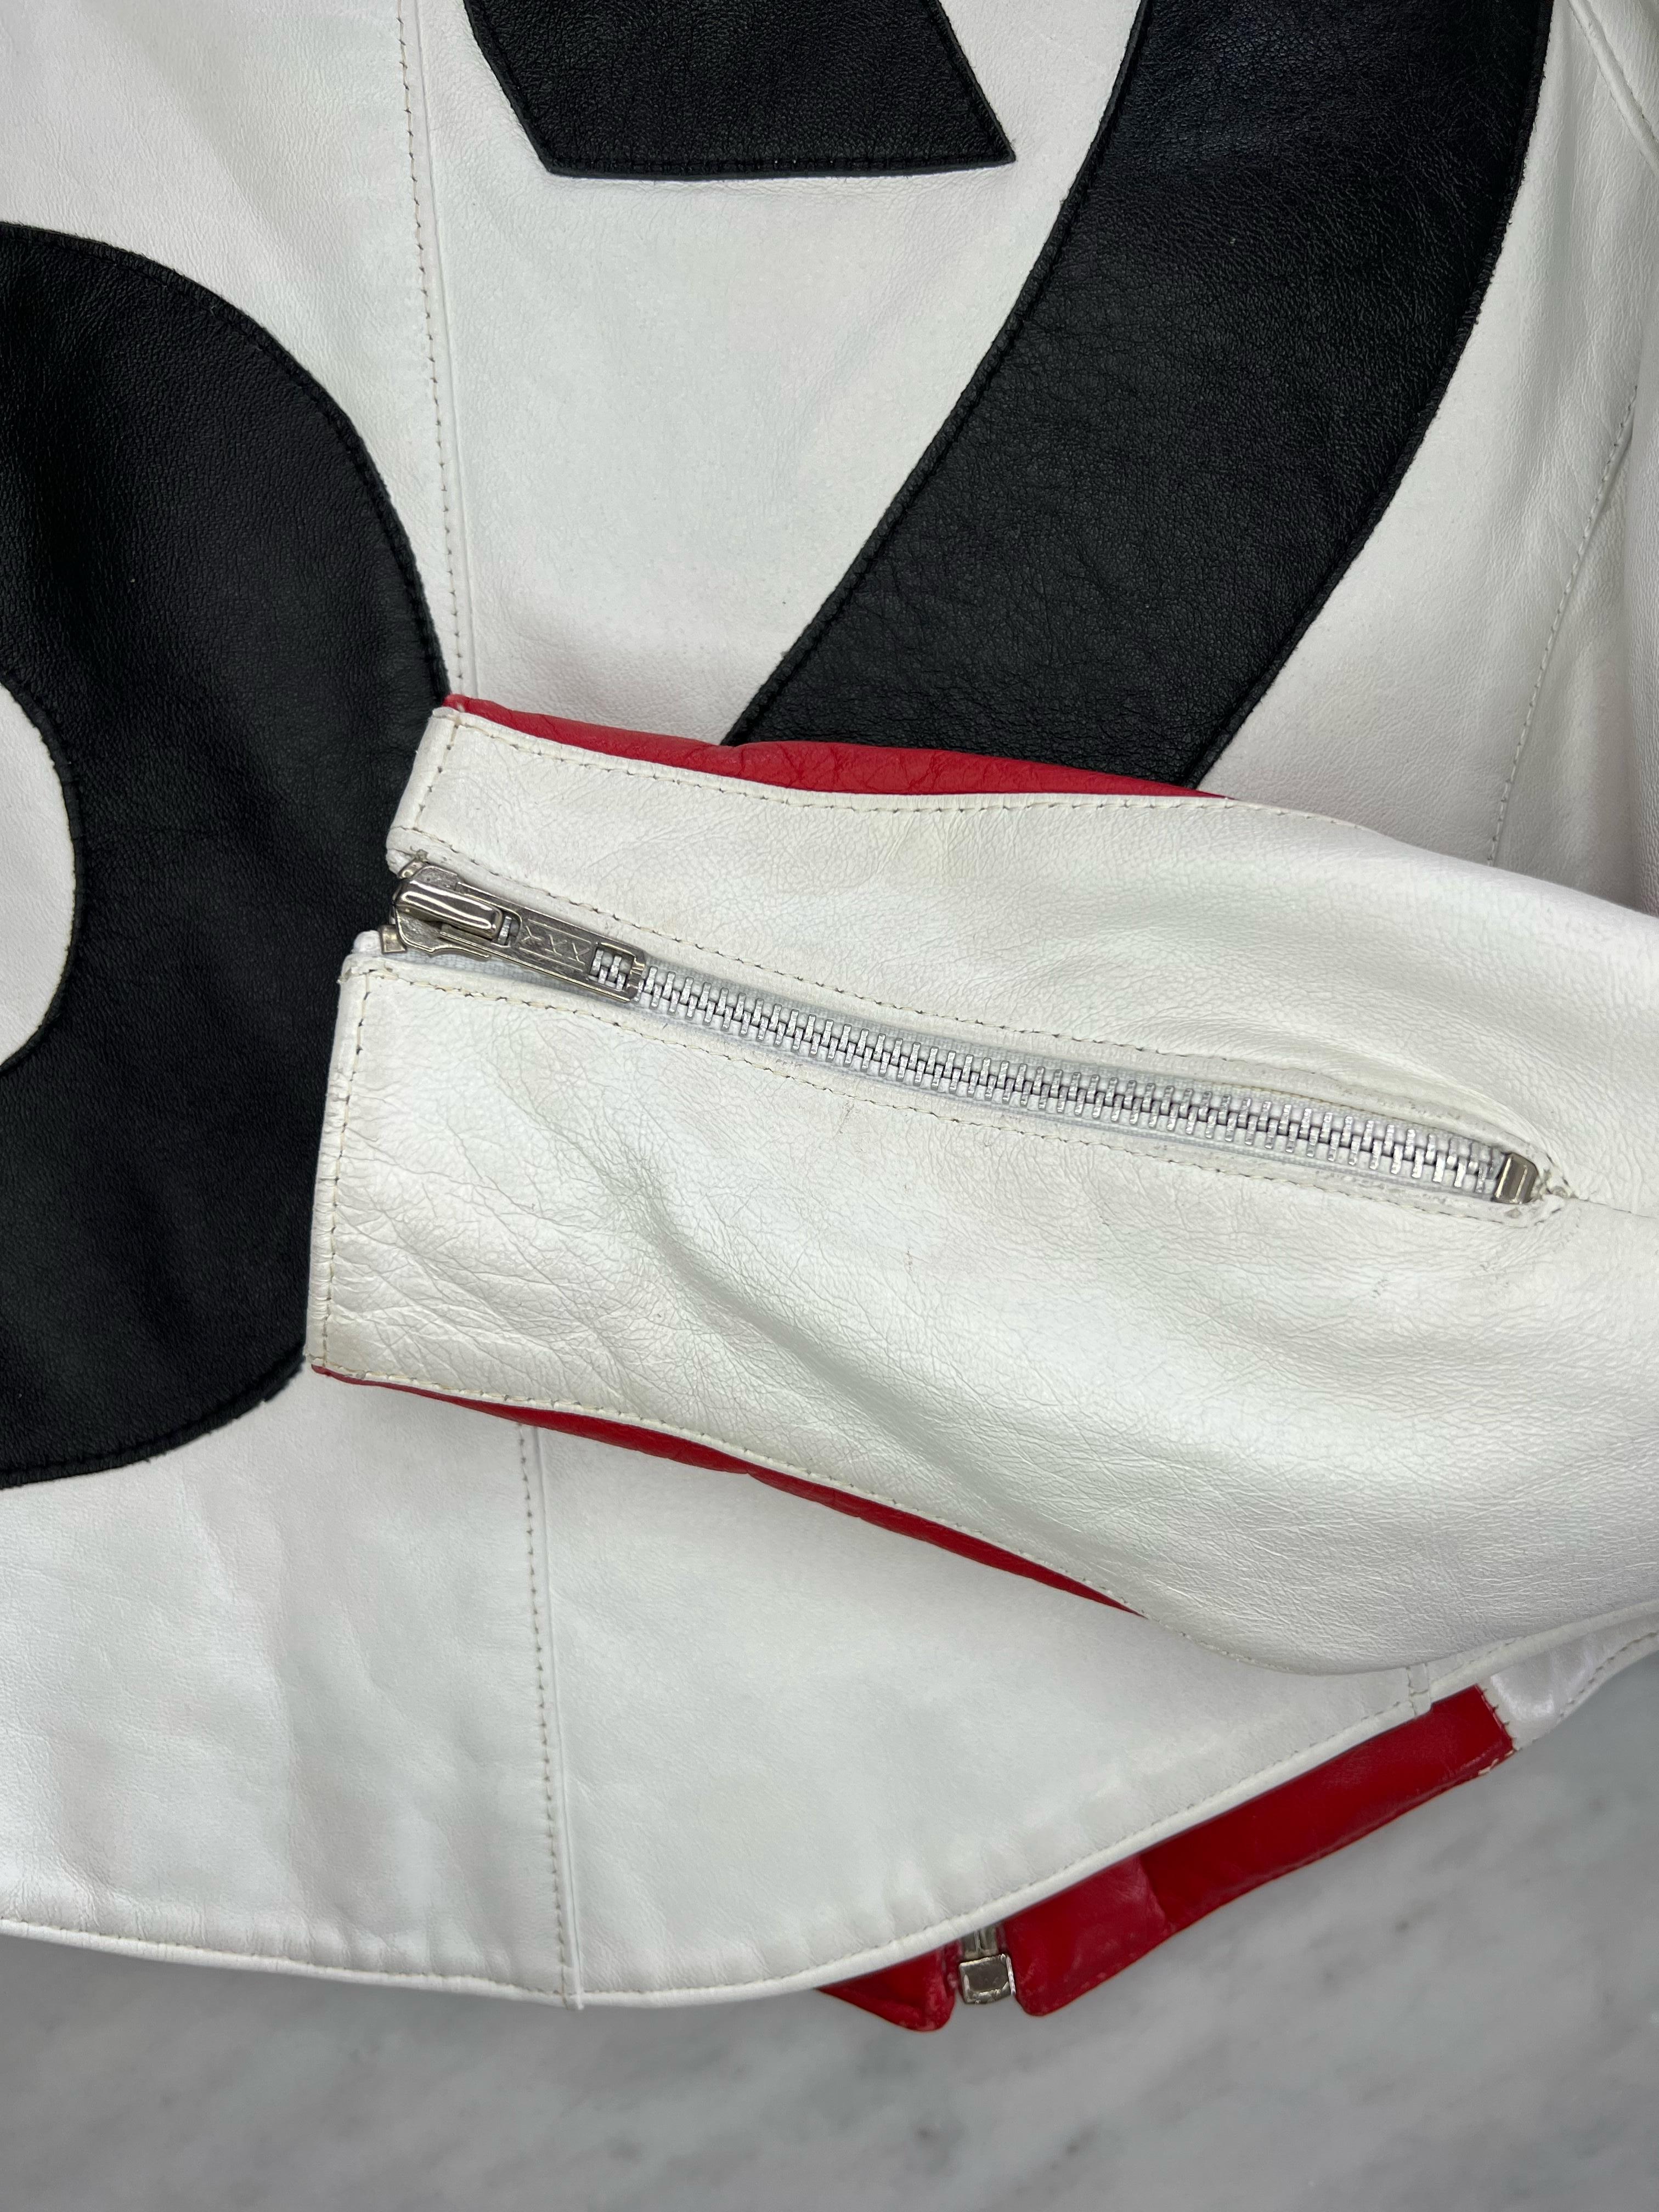 S/S 1990 Thierry Mugler Padded White Red Leather Space Age Motorcycle Zip Jacket 9